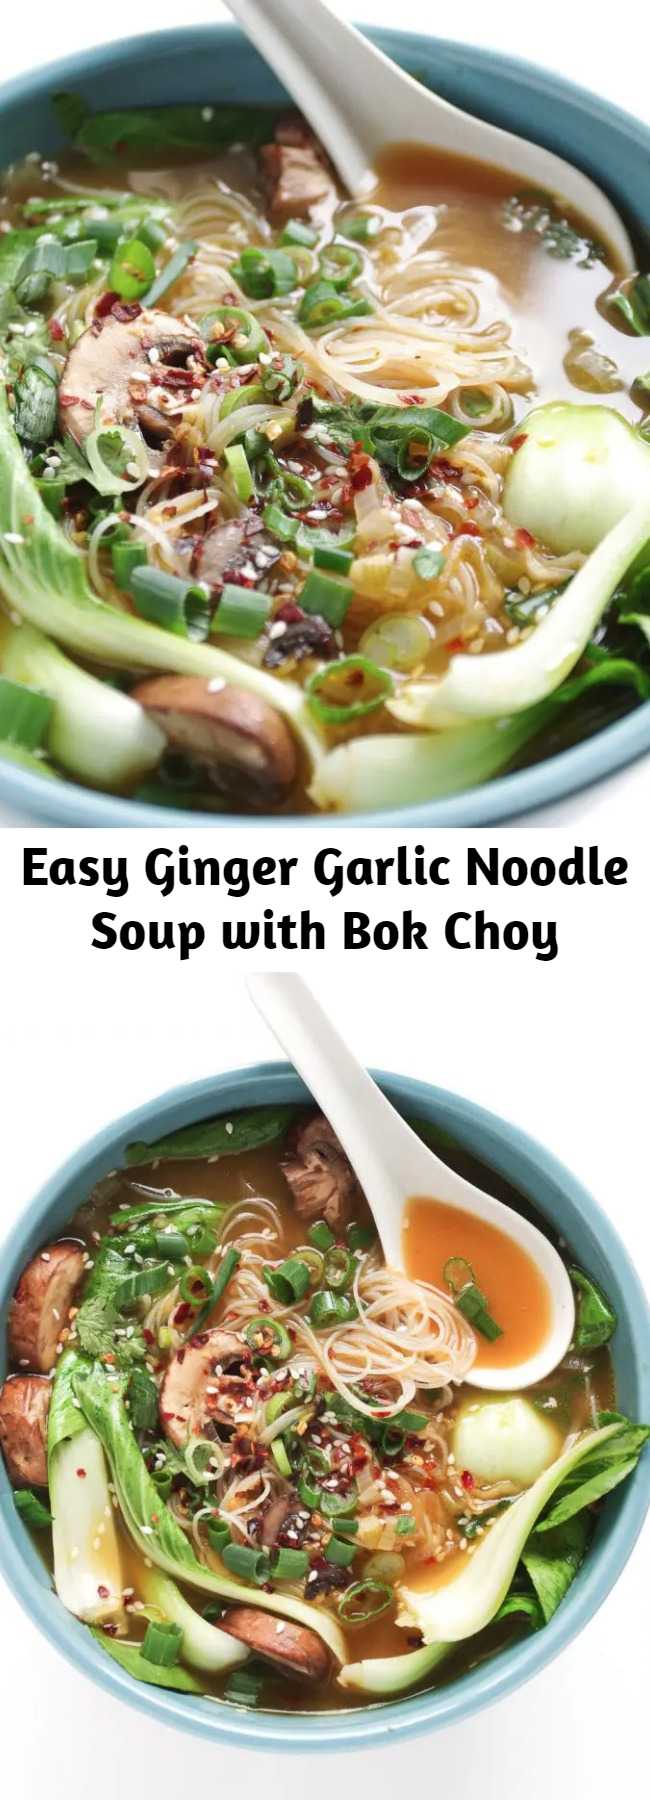 Easy Ginger Garlic Noodle Soup with Bok Choy Recipe - Ginger Garlic Noodle Soup with Bok Choy Ginger Garlic Noodle Soup with Bok Choy is a nutritious, comforting, and flu-fighting twenty-minute recipe made with homemade vegetarian broth, noodles, mushrooms, and baby bok choy. Easily make it your own by adding chicken, shrimp, spicy chilis, or other veggies.